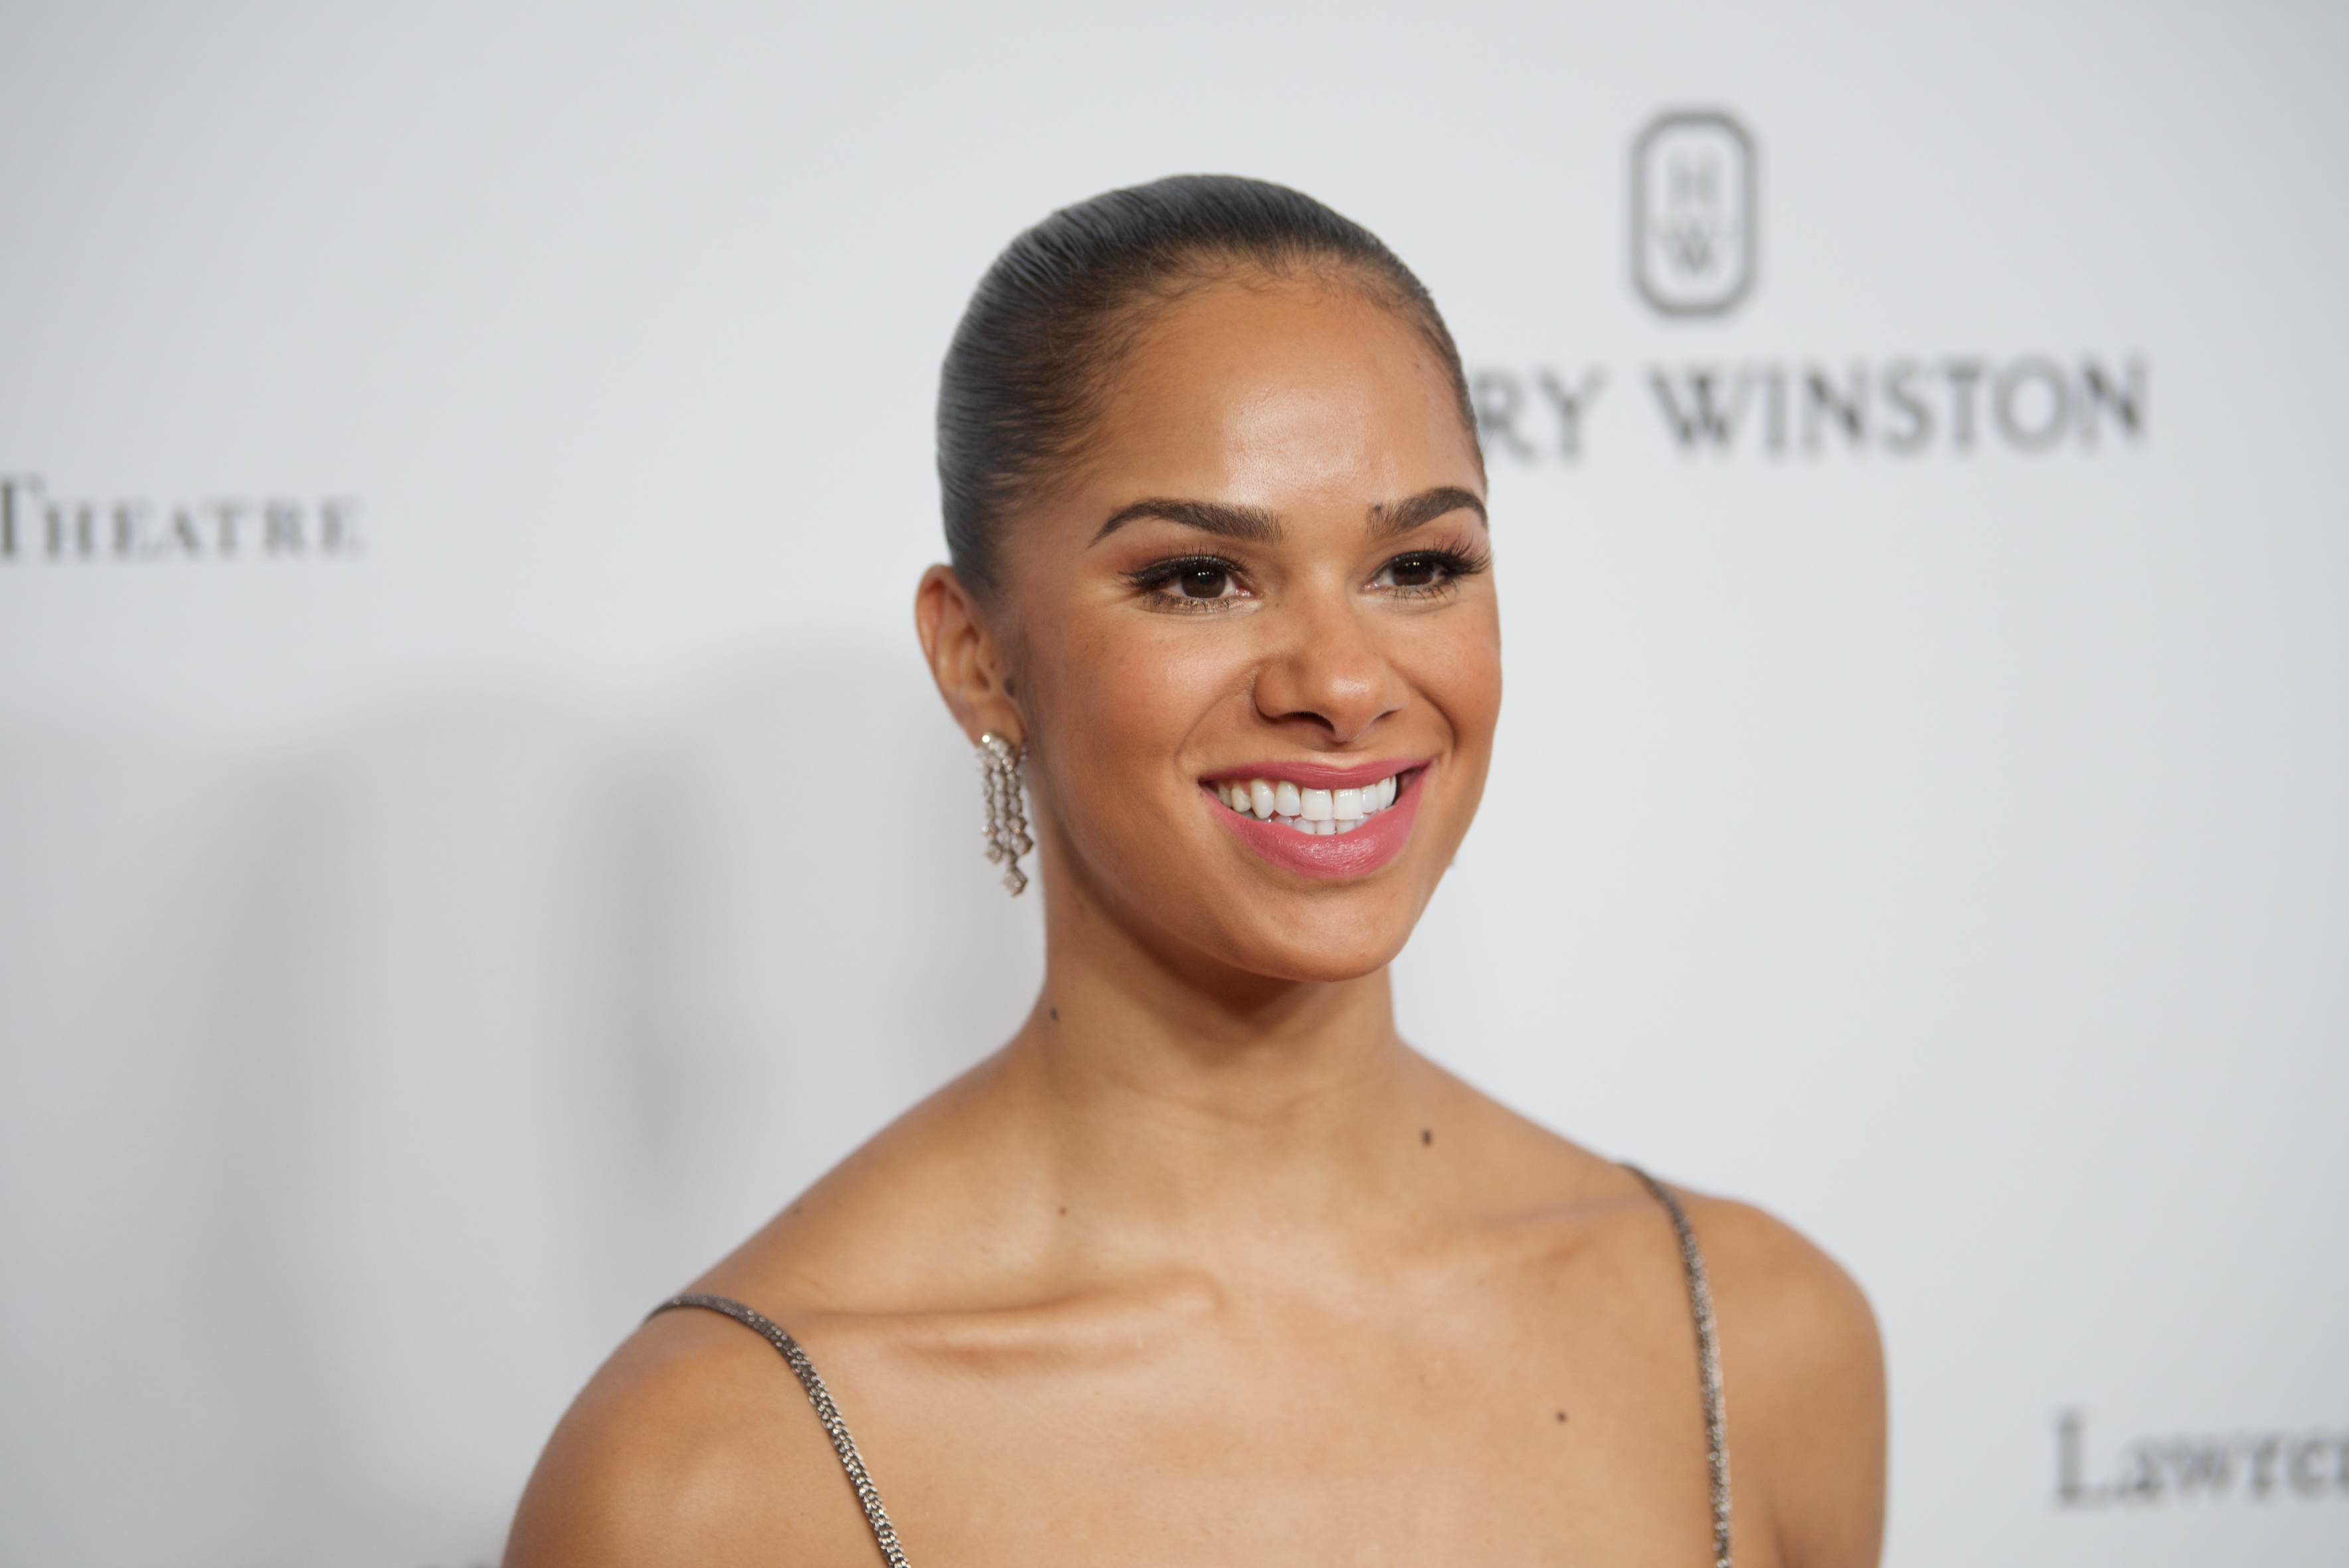 BEVERLY HILLS, CA - DECEMBER 05:  Principal Dancer Misty Copeland attends the American Ballet Theatre Annual Holliday Benefit at The Beverly Hilton Hotel on December 5, 2016 in Beverly Hills, California.  (Photo by Earl Gibson III/WireImage) (Earl Gibson III&mdash;WireImage)